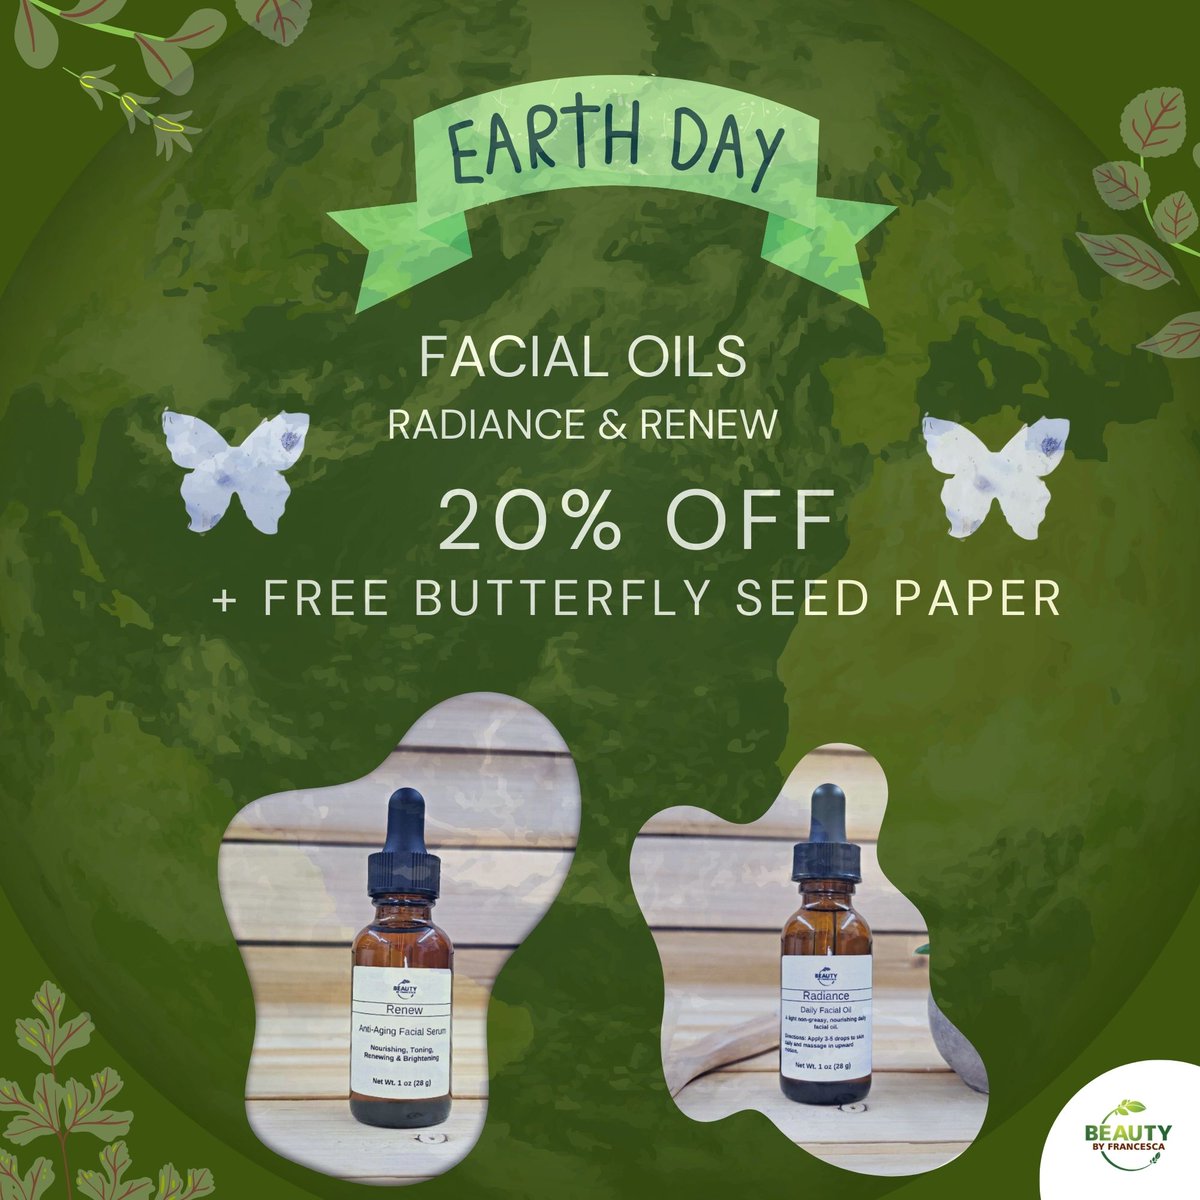 Happy Earth Day!  Get 20% off on facial oils and serums, plus FREE butterfly seed paper with every order today!  

#naturalskincare #holisticare #mindfulmoment #greenskincare #earthday